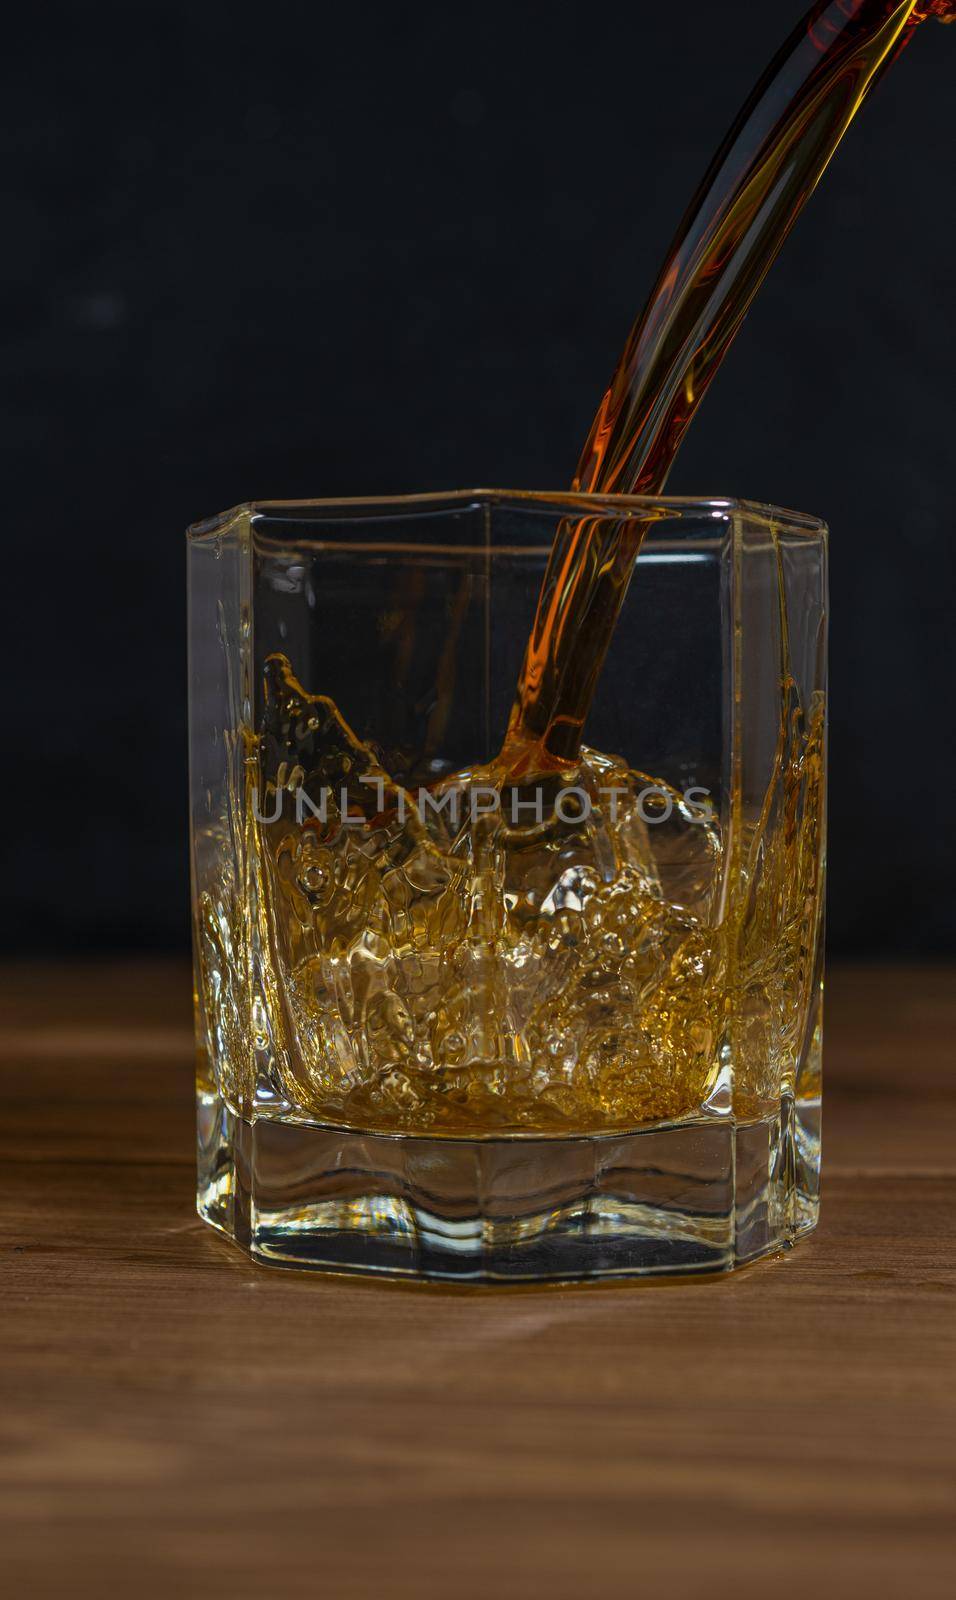 Whiskey drinks on wood with ice cubes and splash by sashokddt